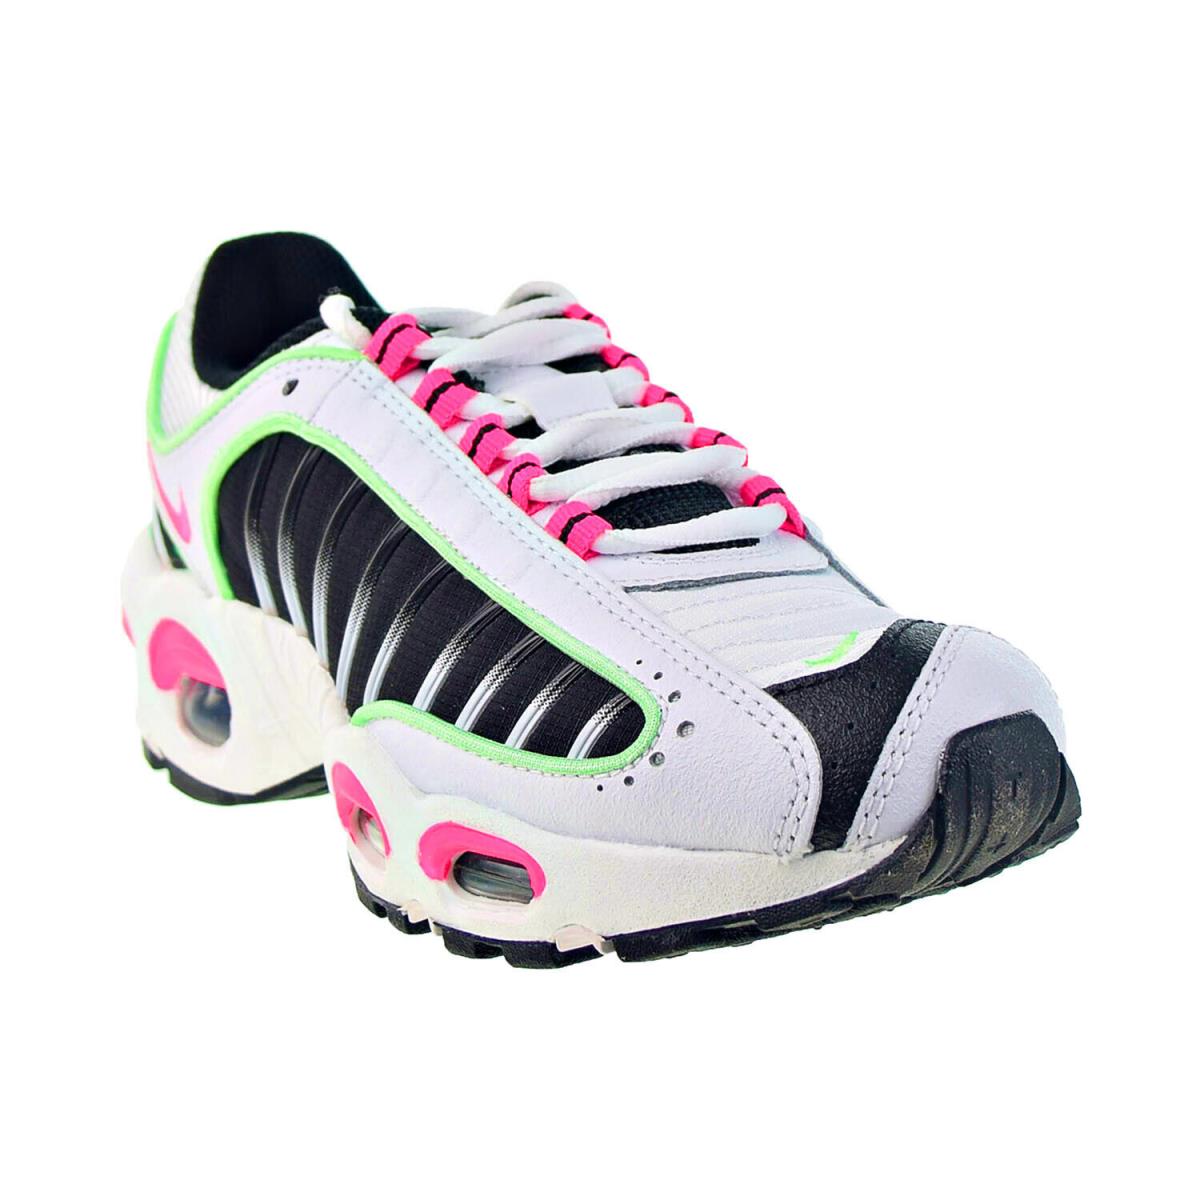 Nike shoes Air Max Tailwind - White/Hyper Pink 1